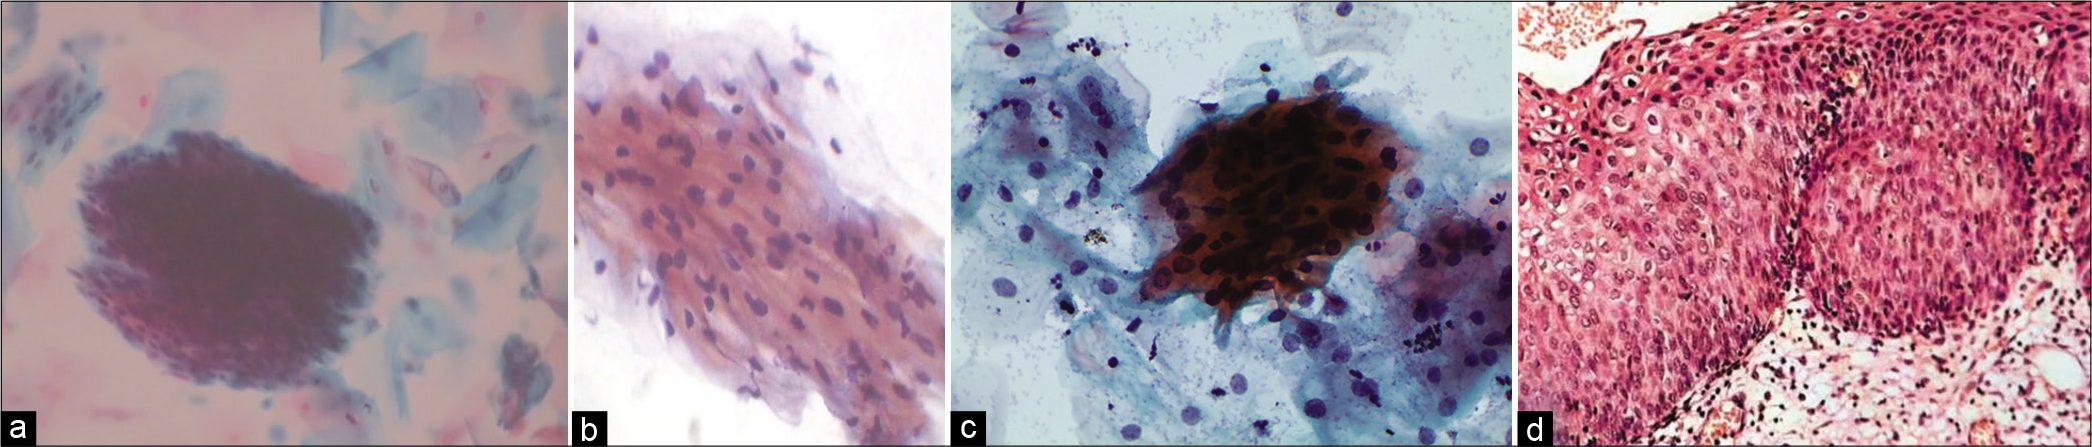 (a and c) LBC. (b) CPS. Atypical parakeratotic cells qualify for ASC category. Smears showing stacks of miniature mature keratinized cells with pleomorphic nuclei (×40). (d) Tissue biopsy showing pleomorphic parakeratotic cells camouflaging the underlying HSIL (×40).